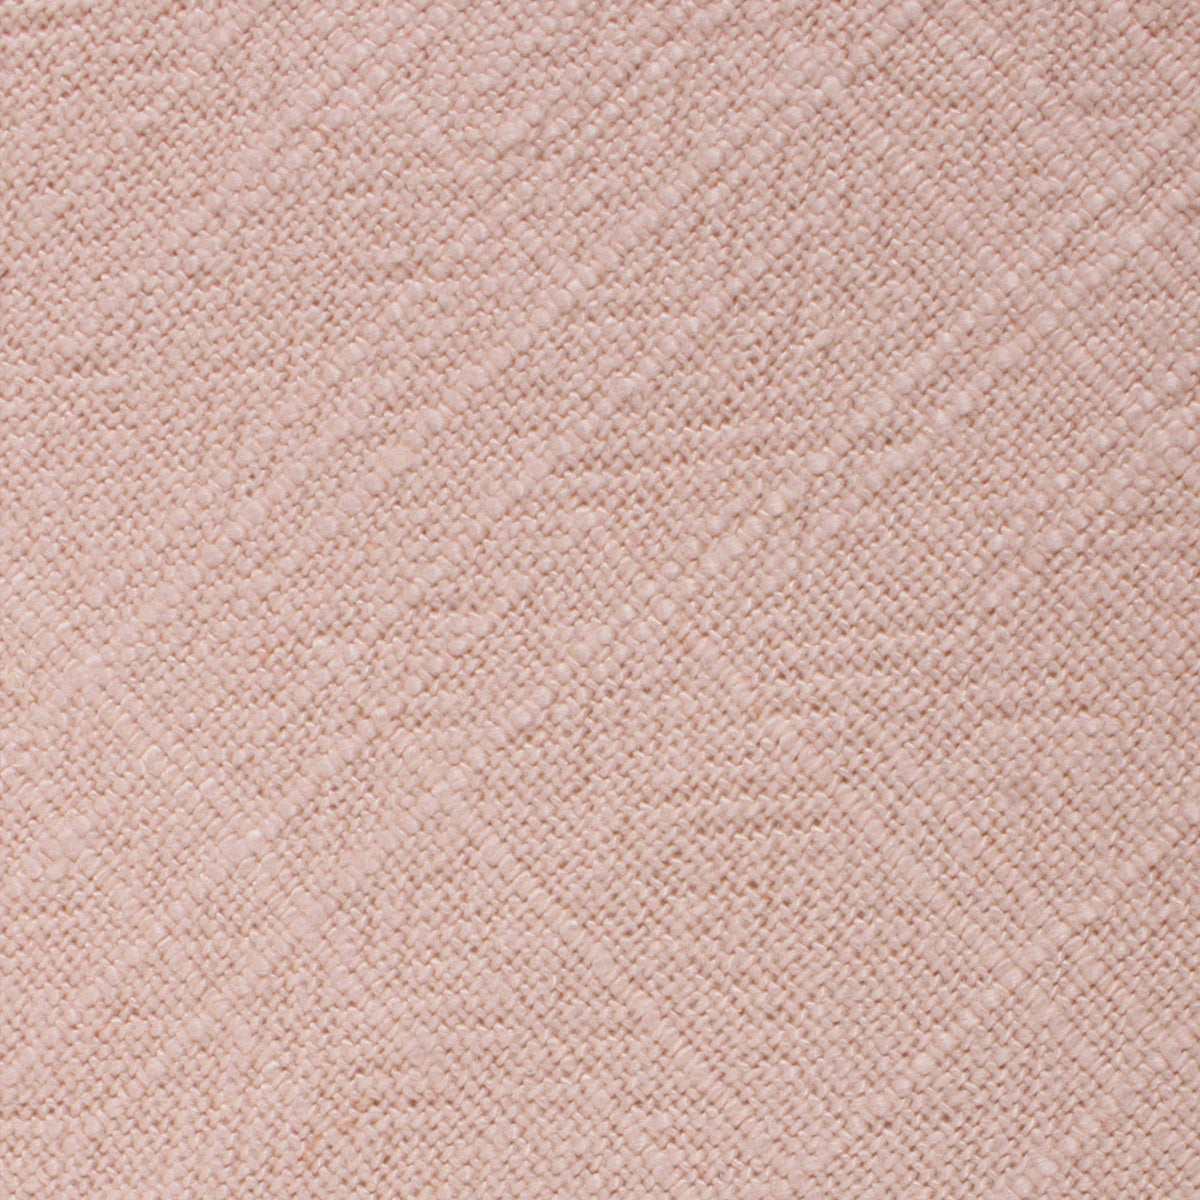 Cameo Beige Pink Chenille Linen Pocket Square Fabric